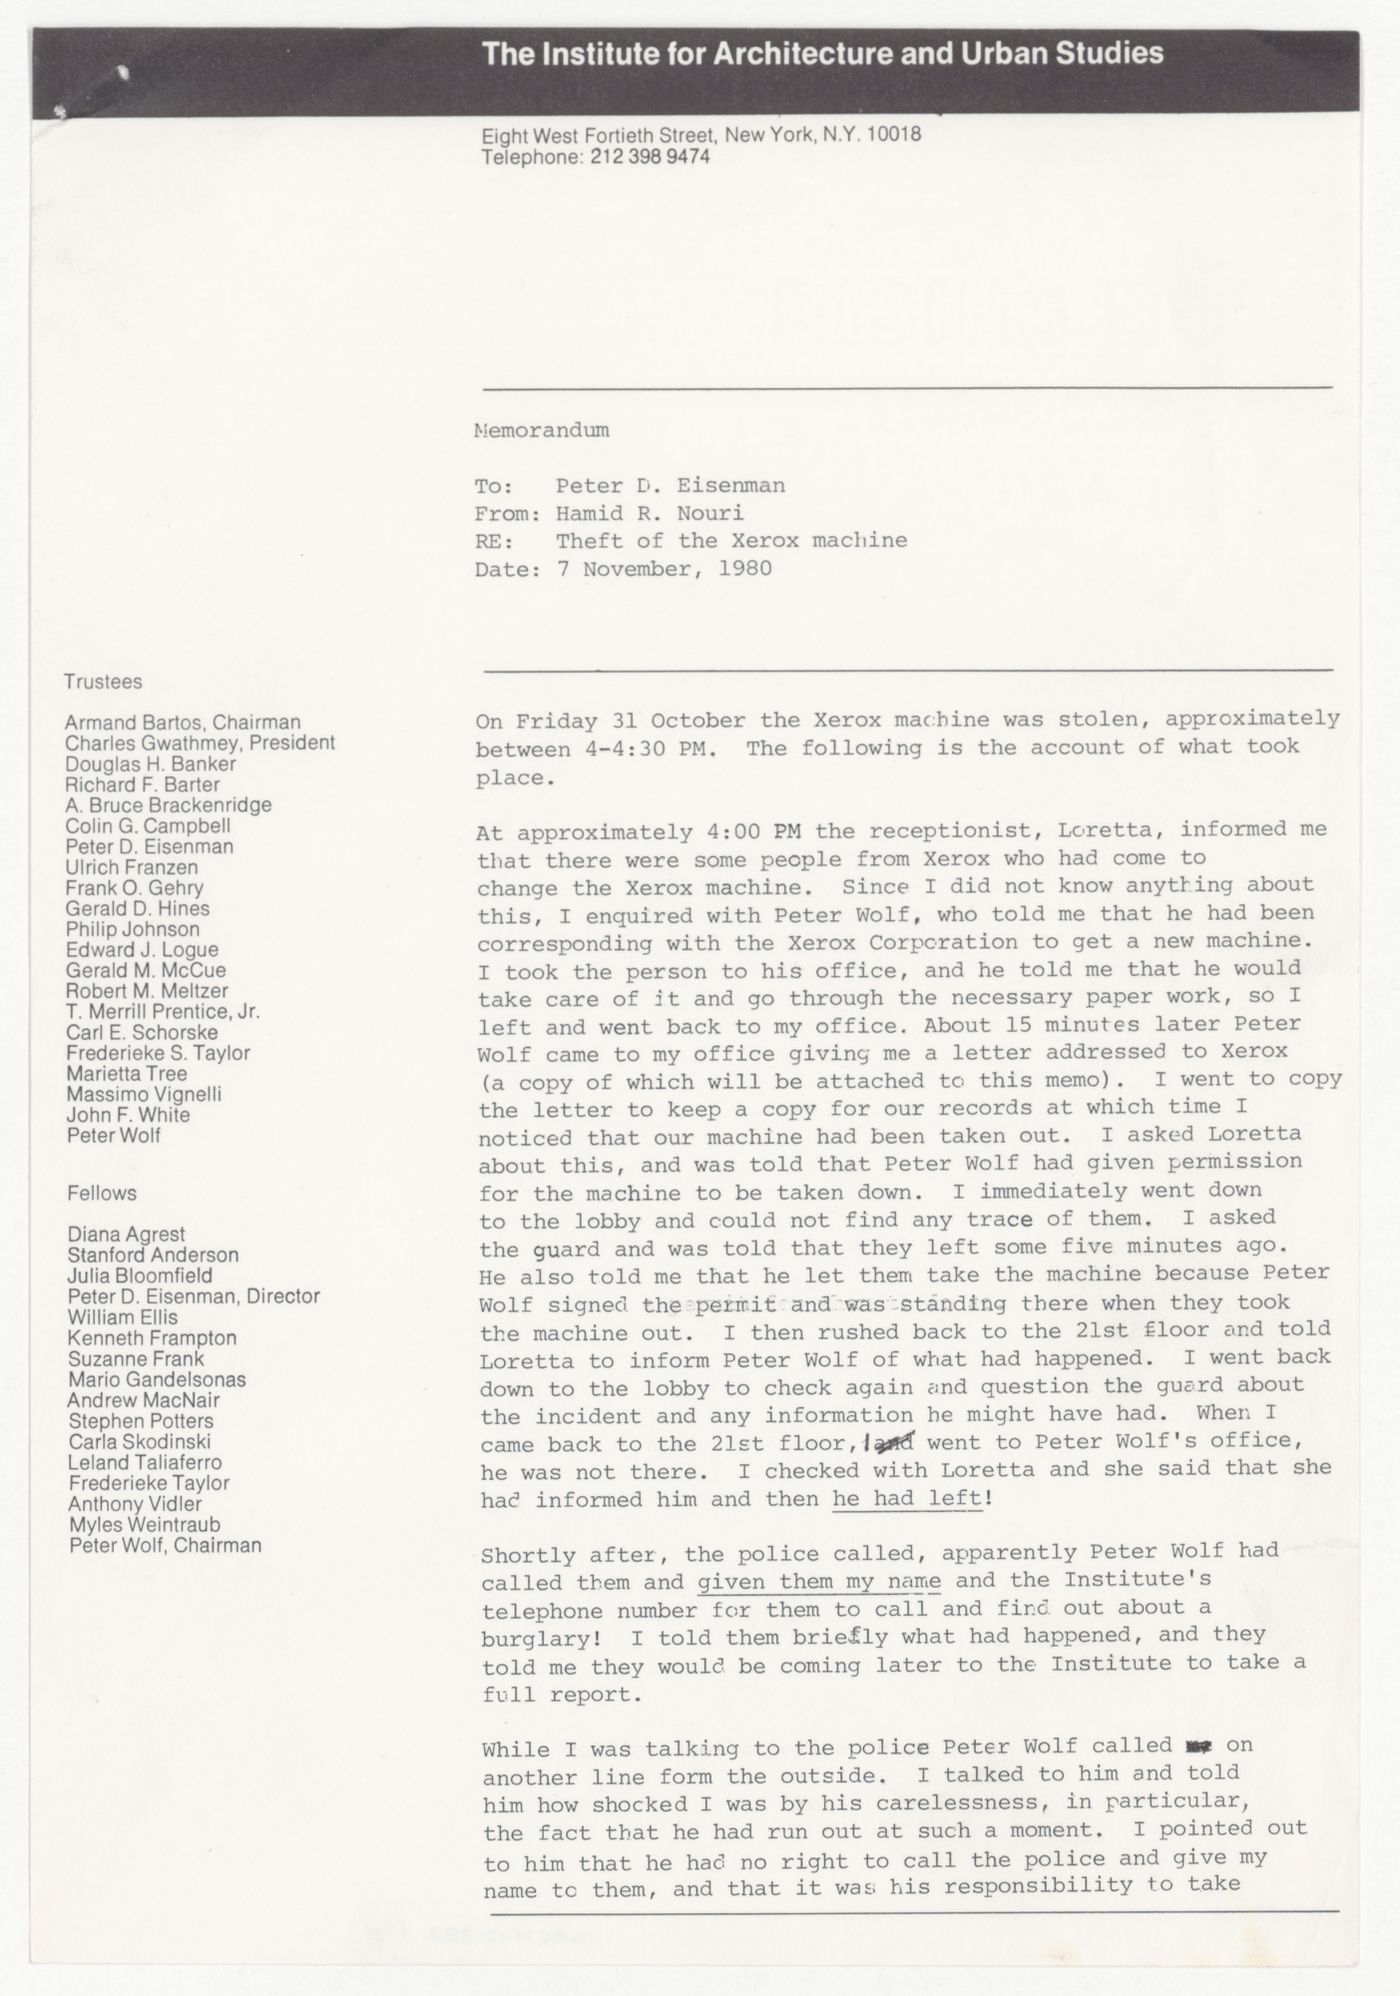 Memorandum from Hamid R. Nouri to Peter D. Eisenman about the theft of the Xerox machine with attached memorandum from Peter Wolf to Xerox company